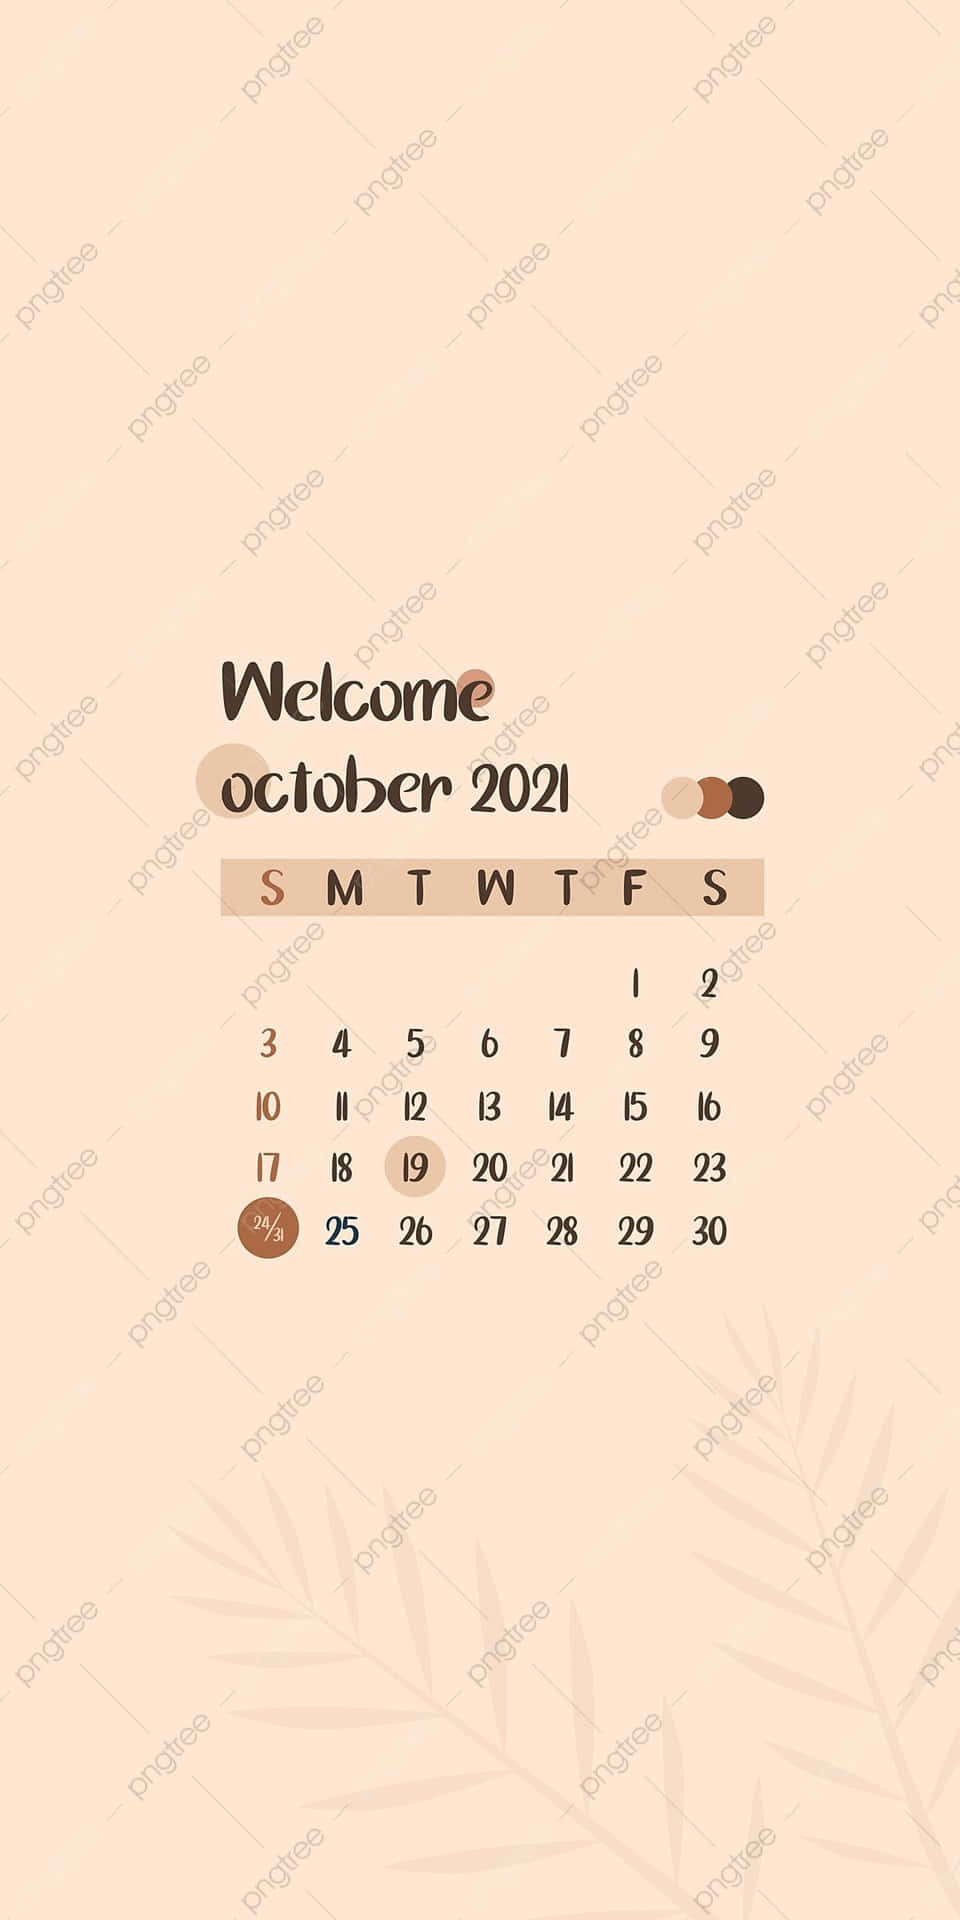 Keep track of important dates in October with this 2021 Calendar Wallpaper